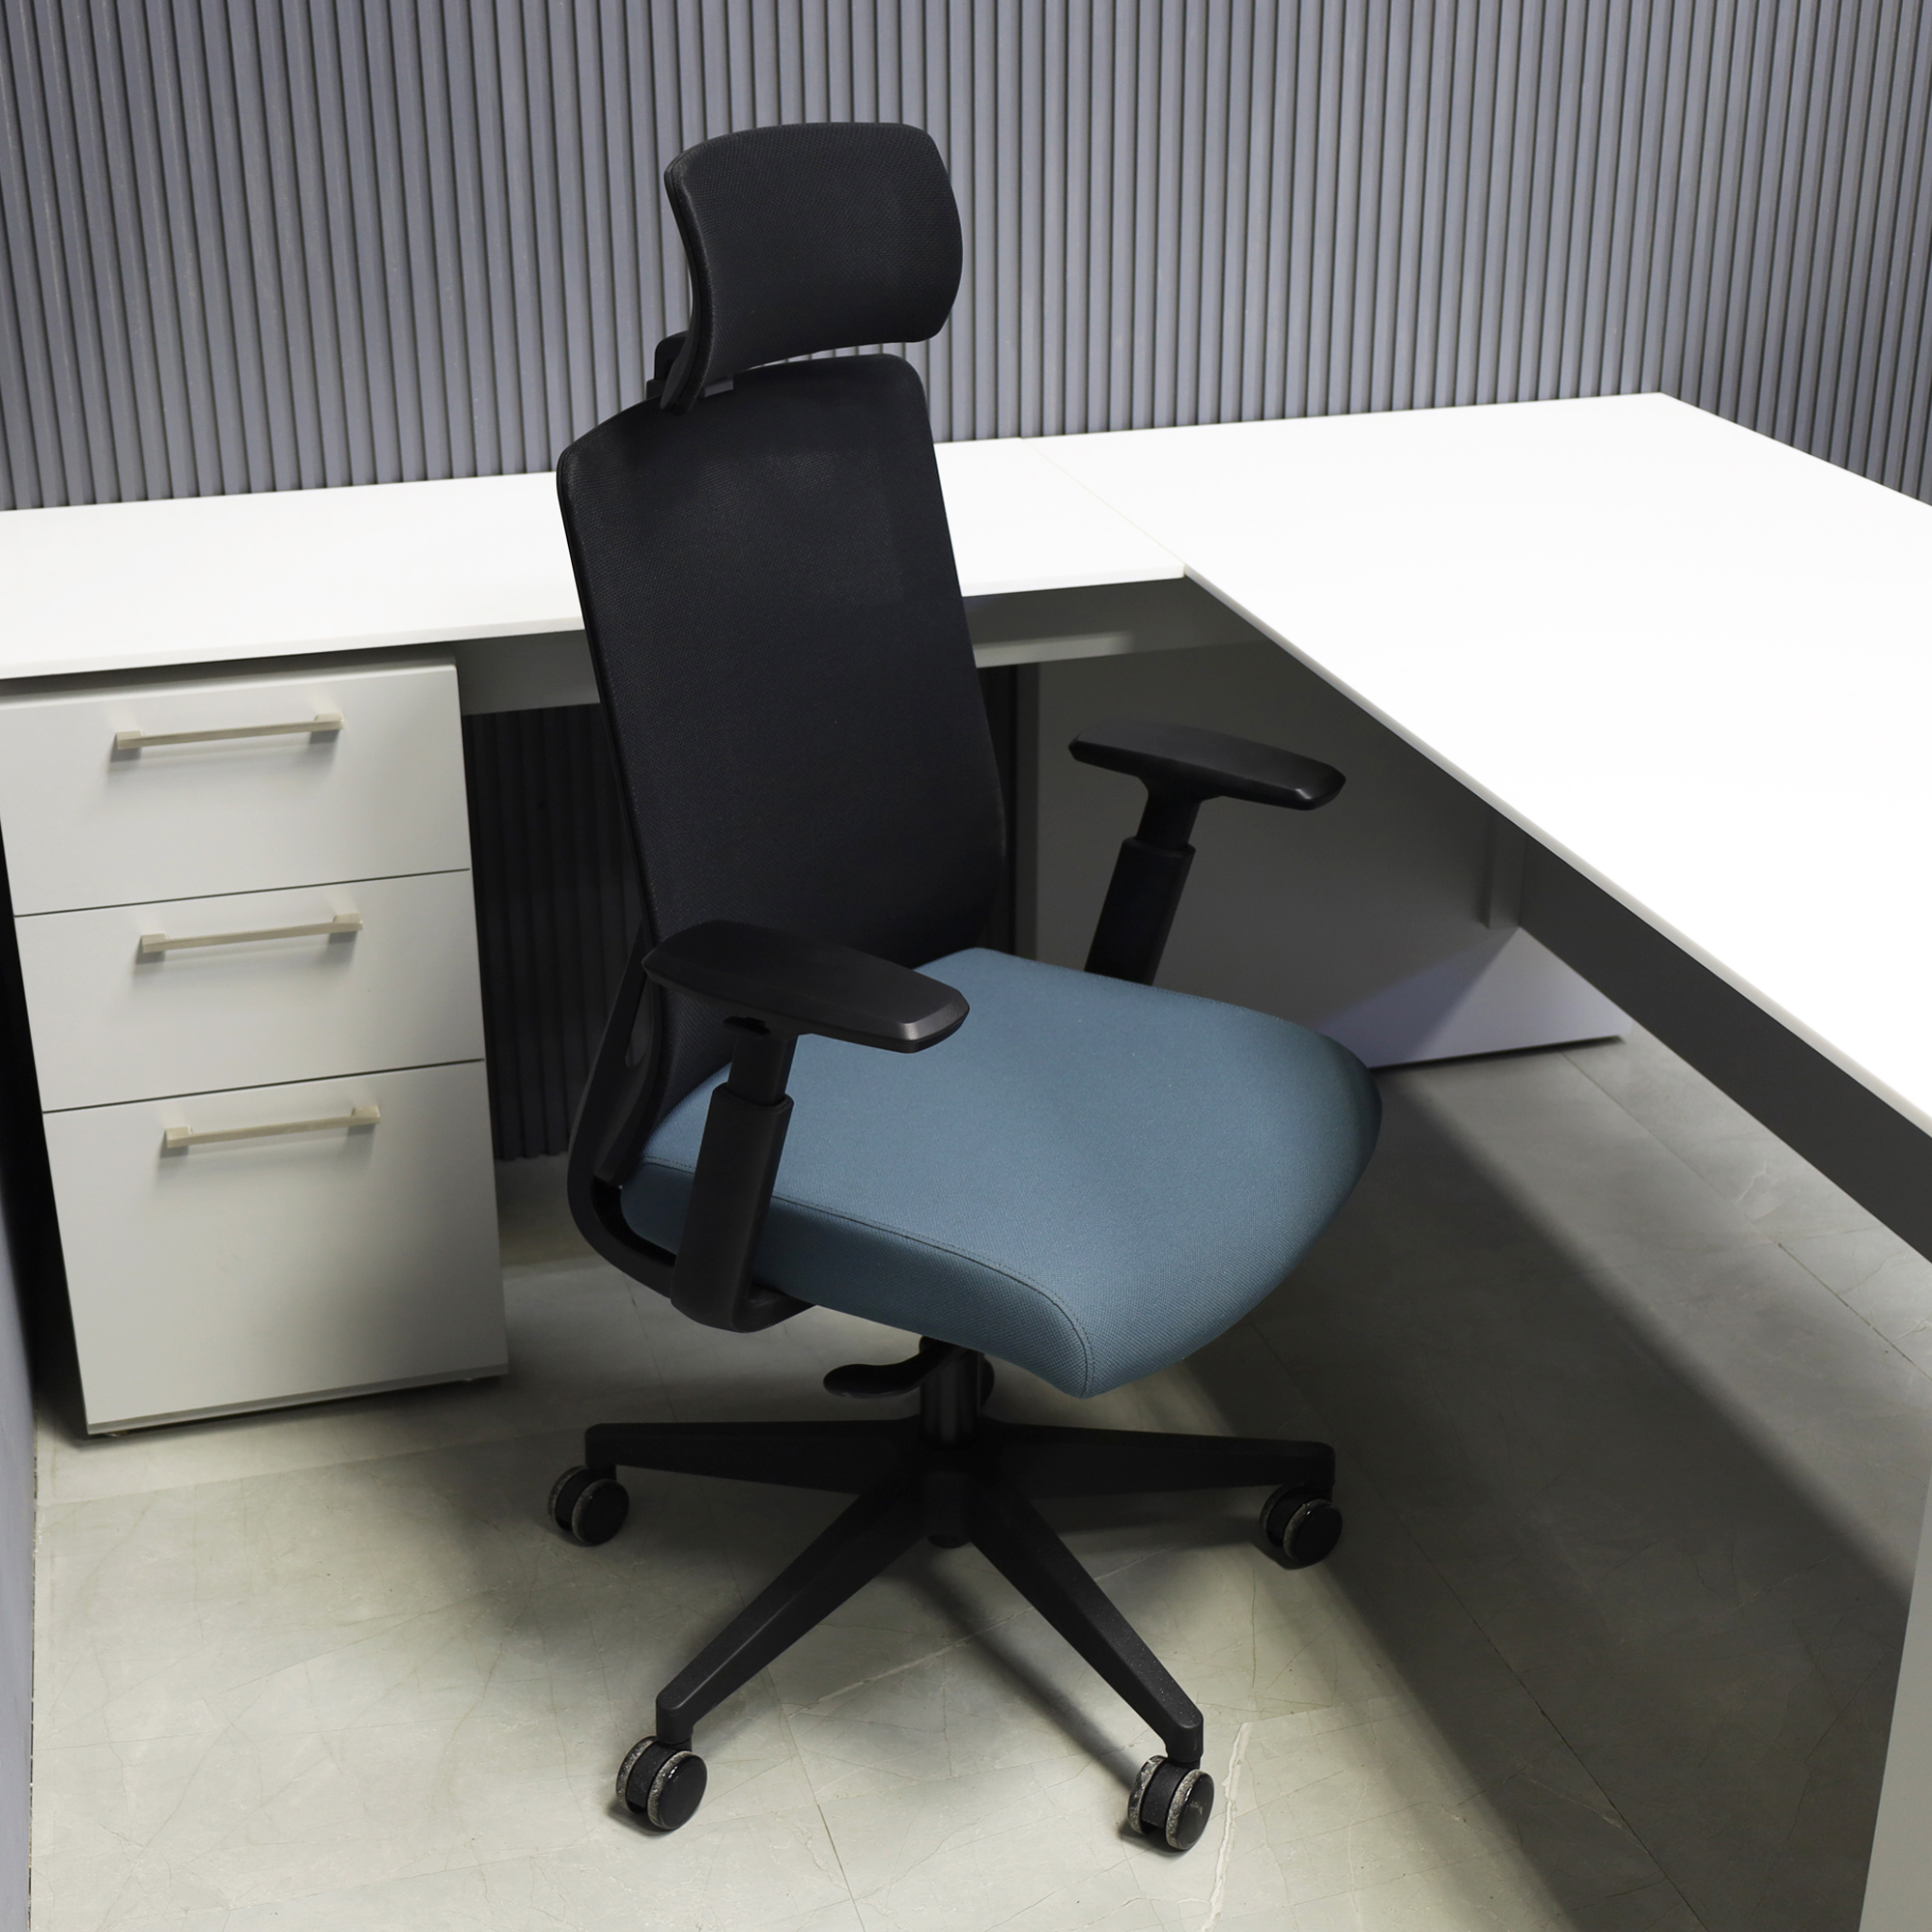 Terra Ergo Office Chair in black mesh back and gray fabric seat cushion, shown here.